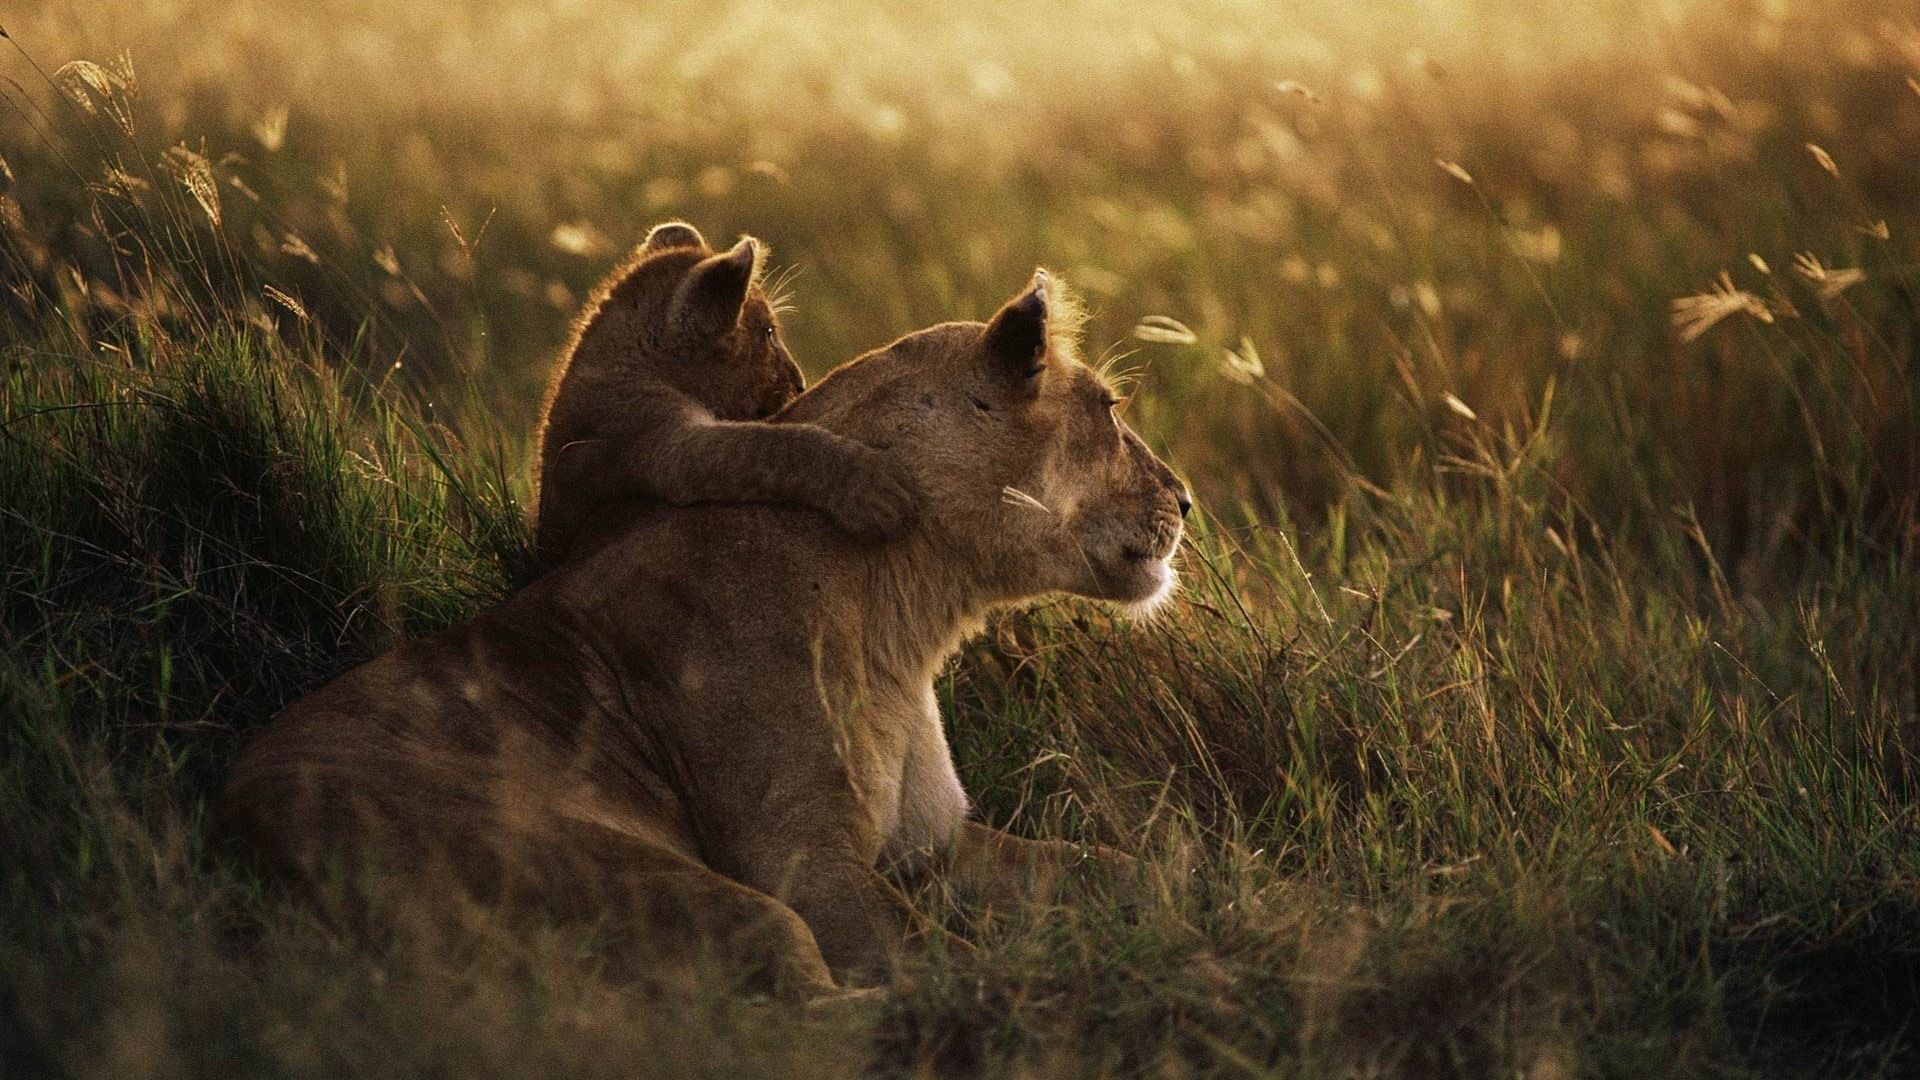 Mother Lion And Baby - HD Wallpaper 